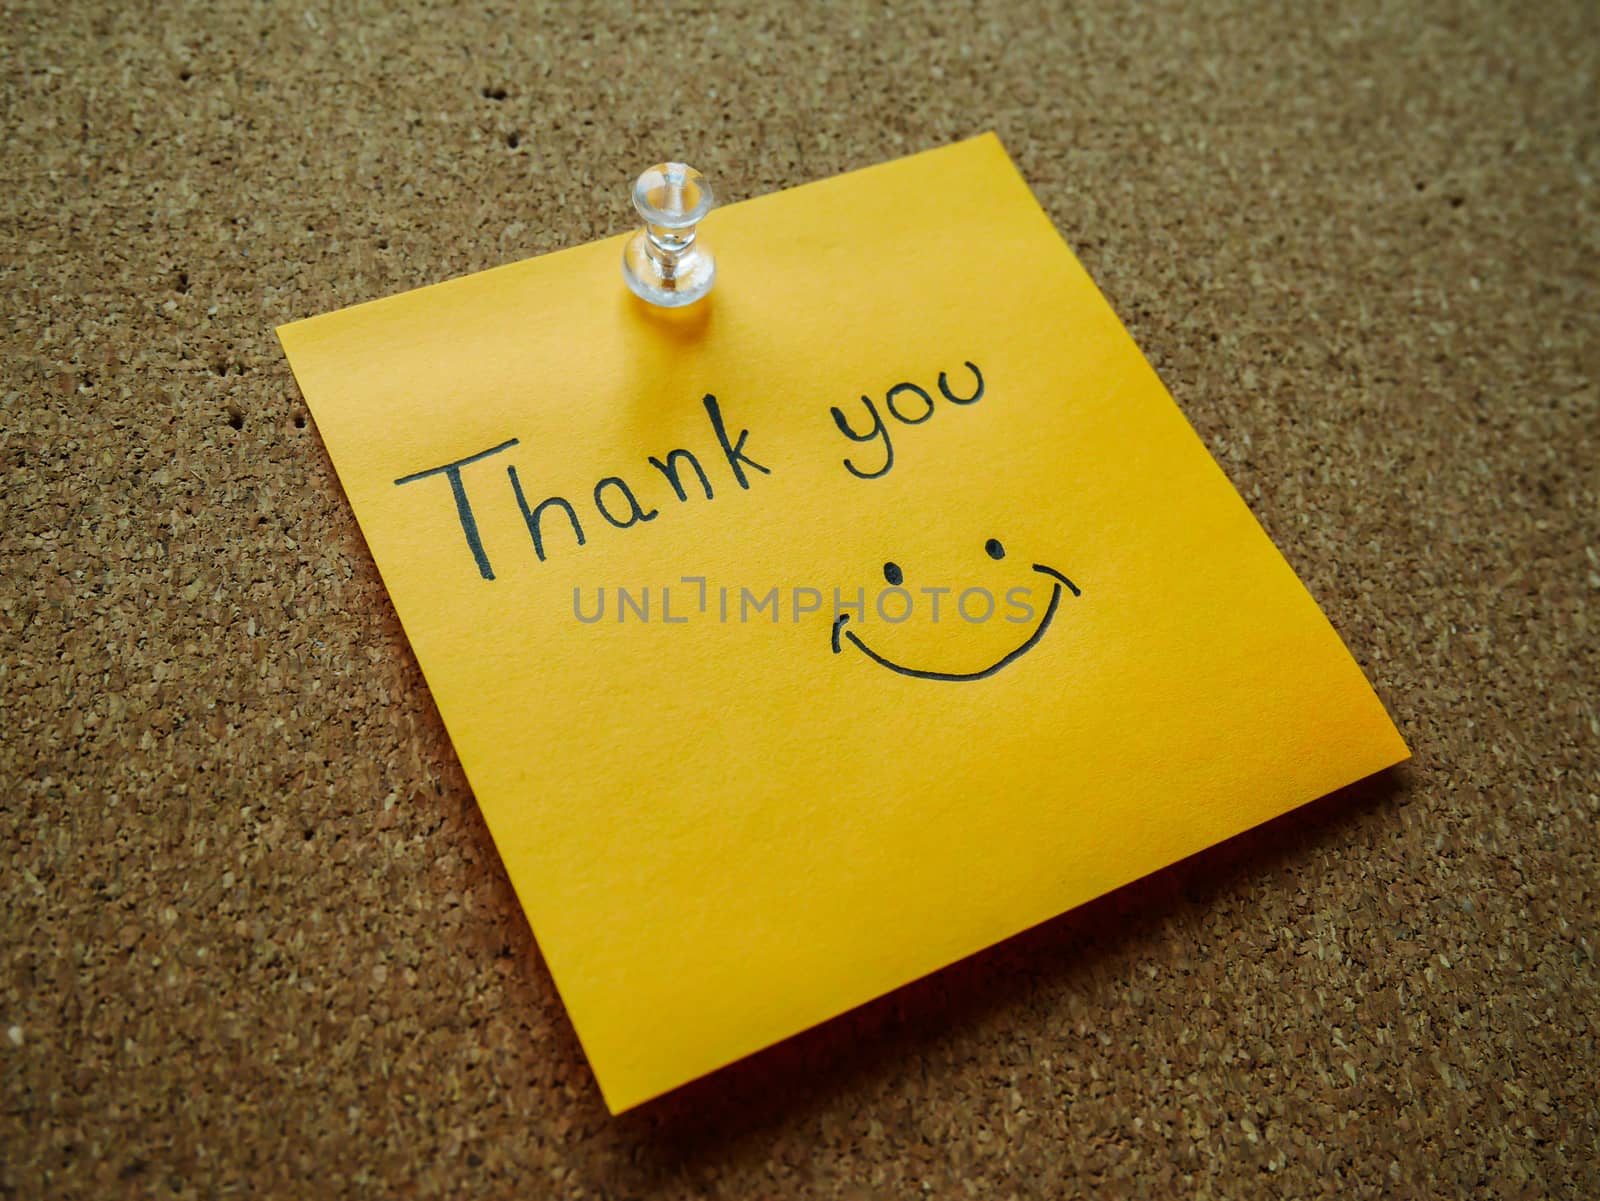 Writting "Thank you" on post it note for someone